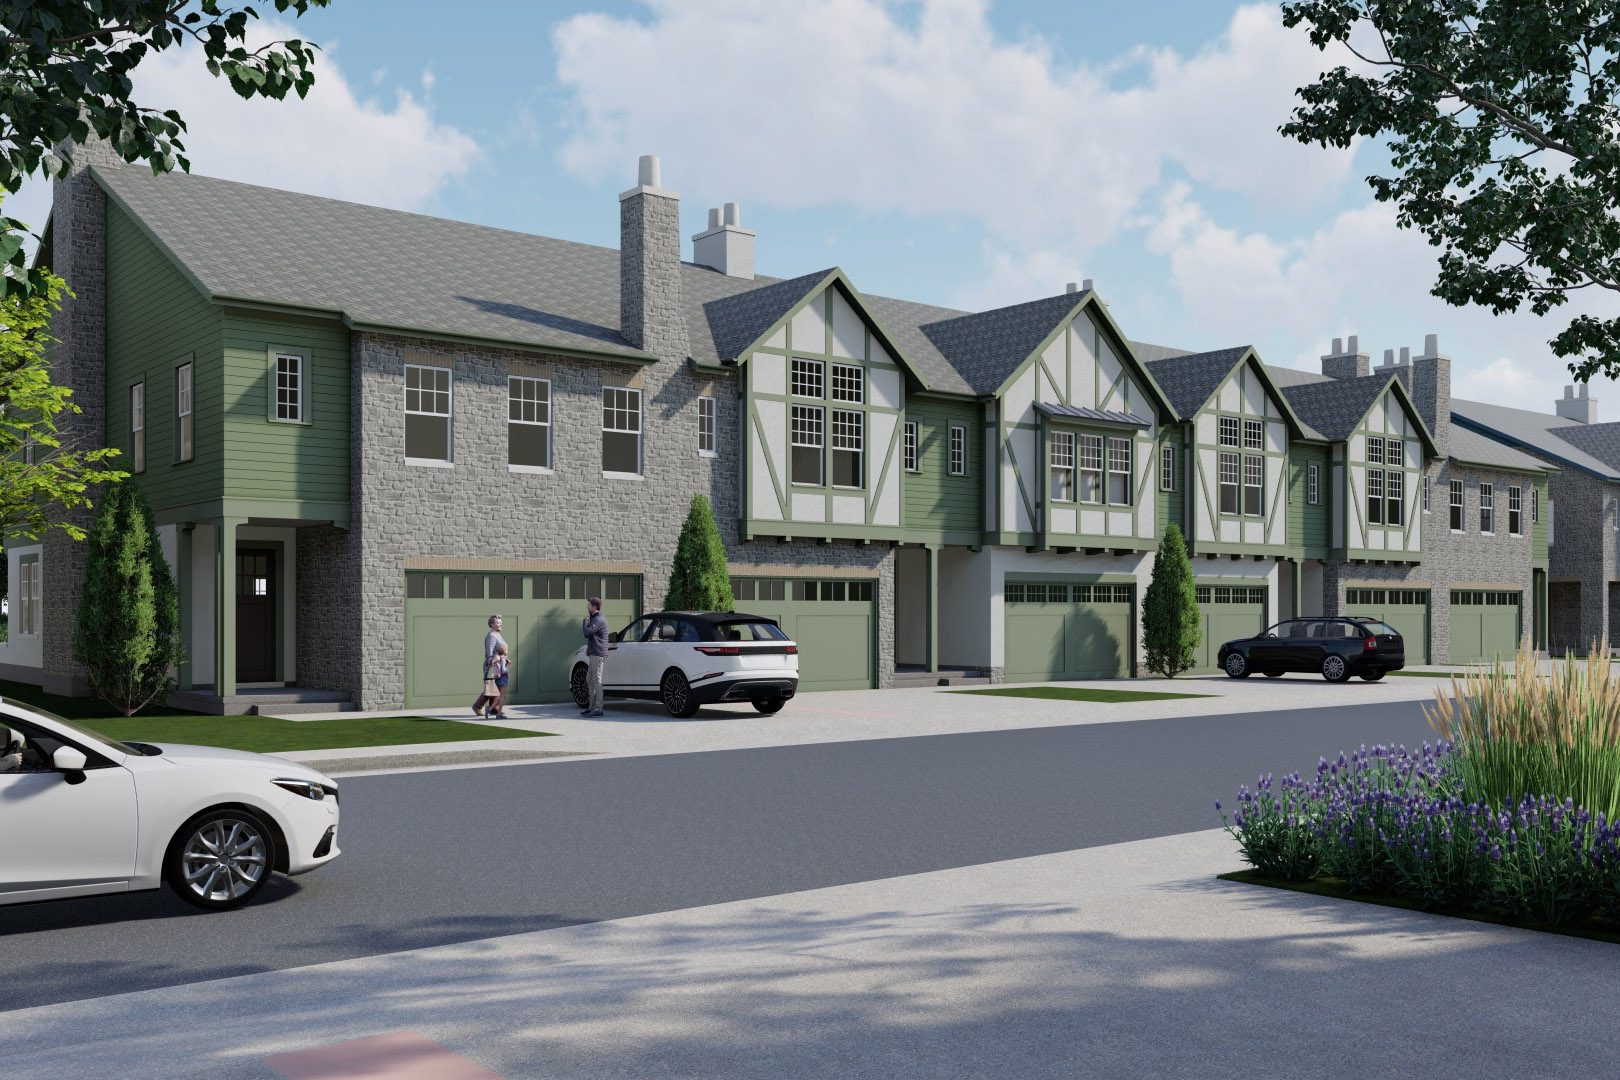 Rendered elevation of Songbird Cove townhomes in Lindon